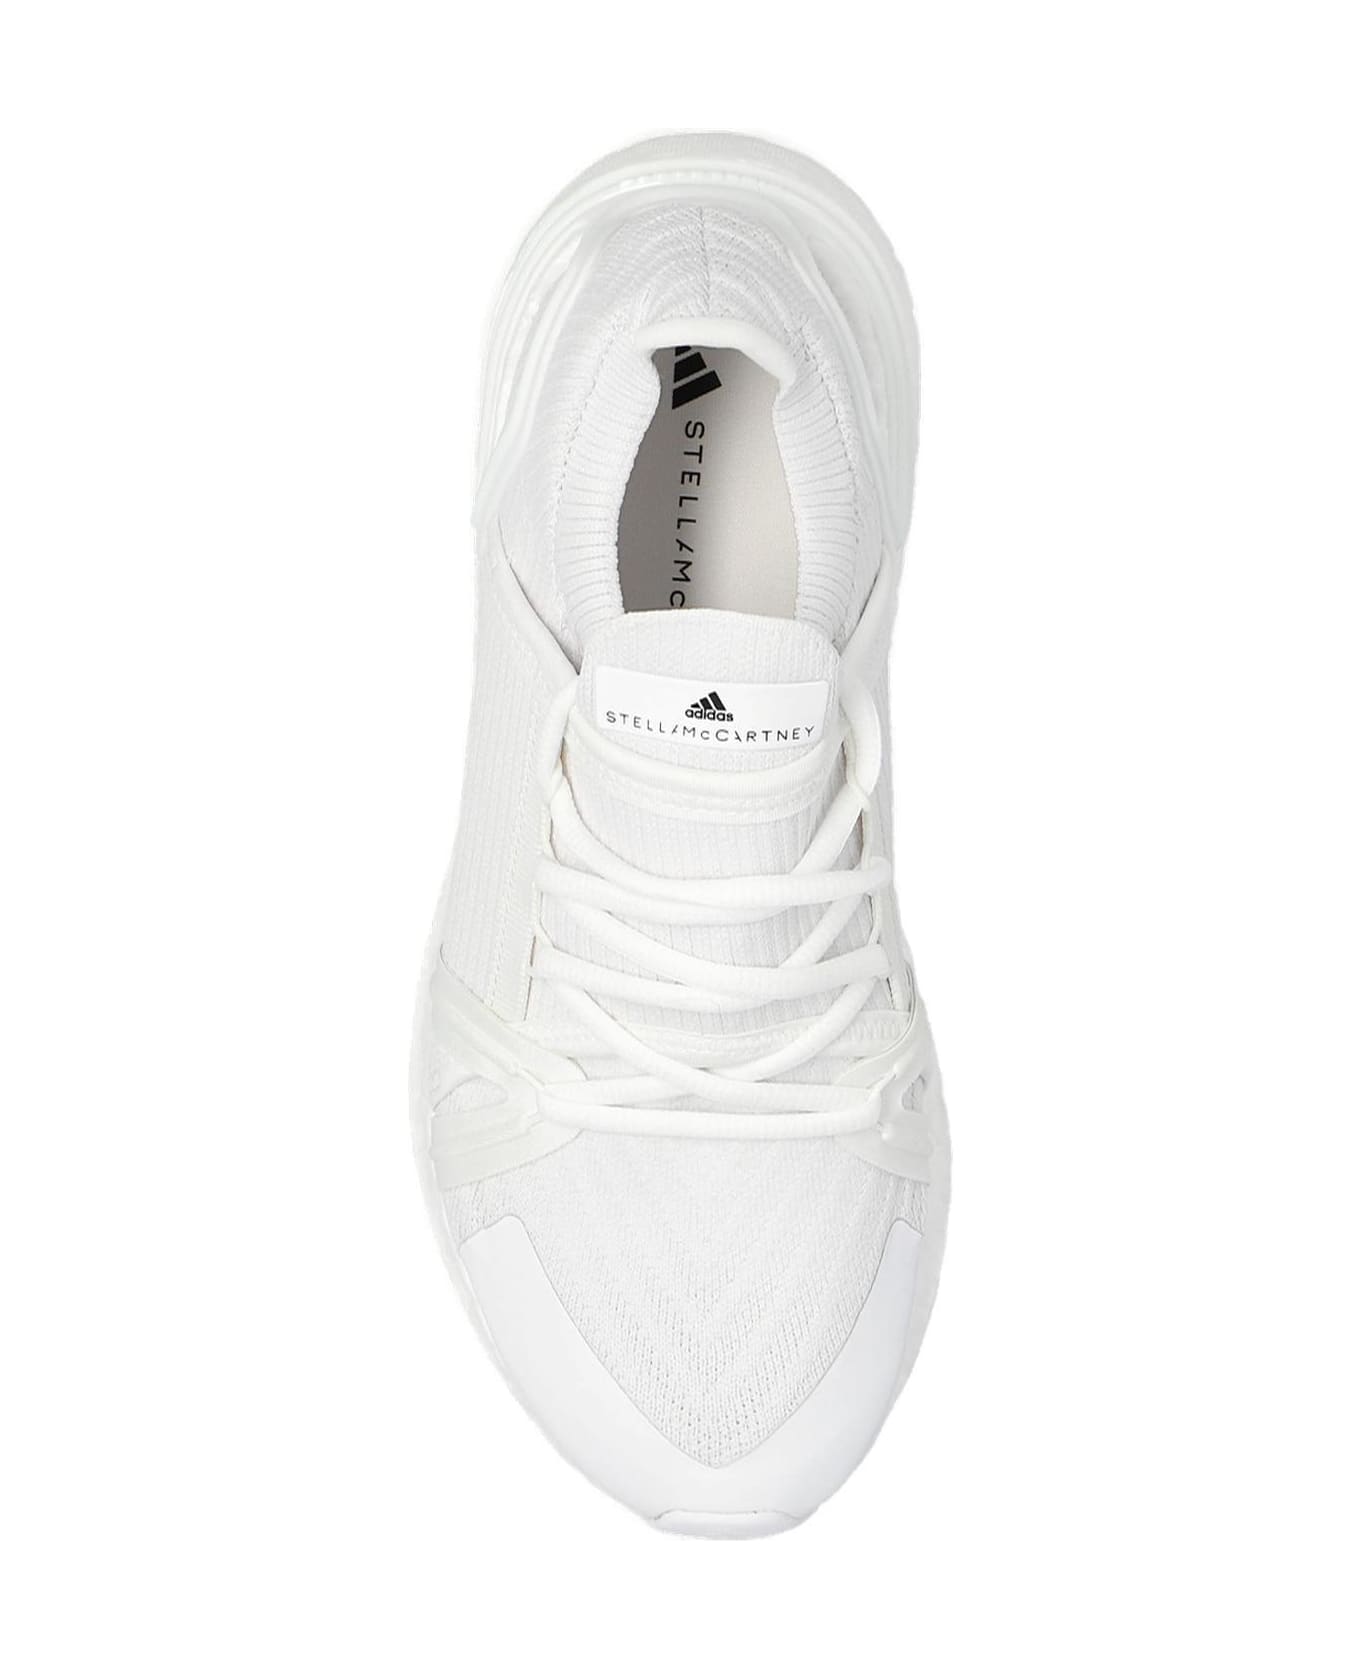 Adidas by Stella McCartney Ultraboost 20 Lace-up Sneakers - White